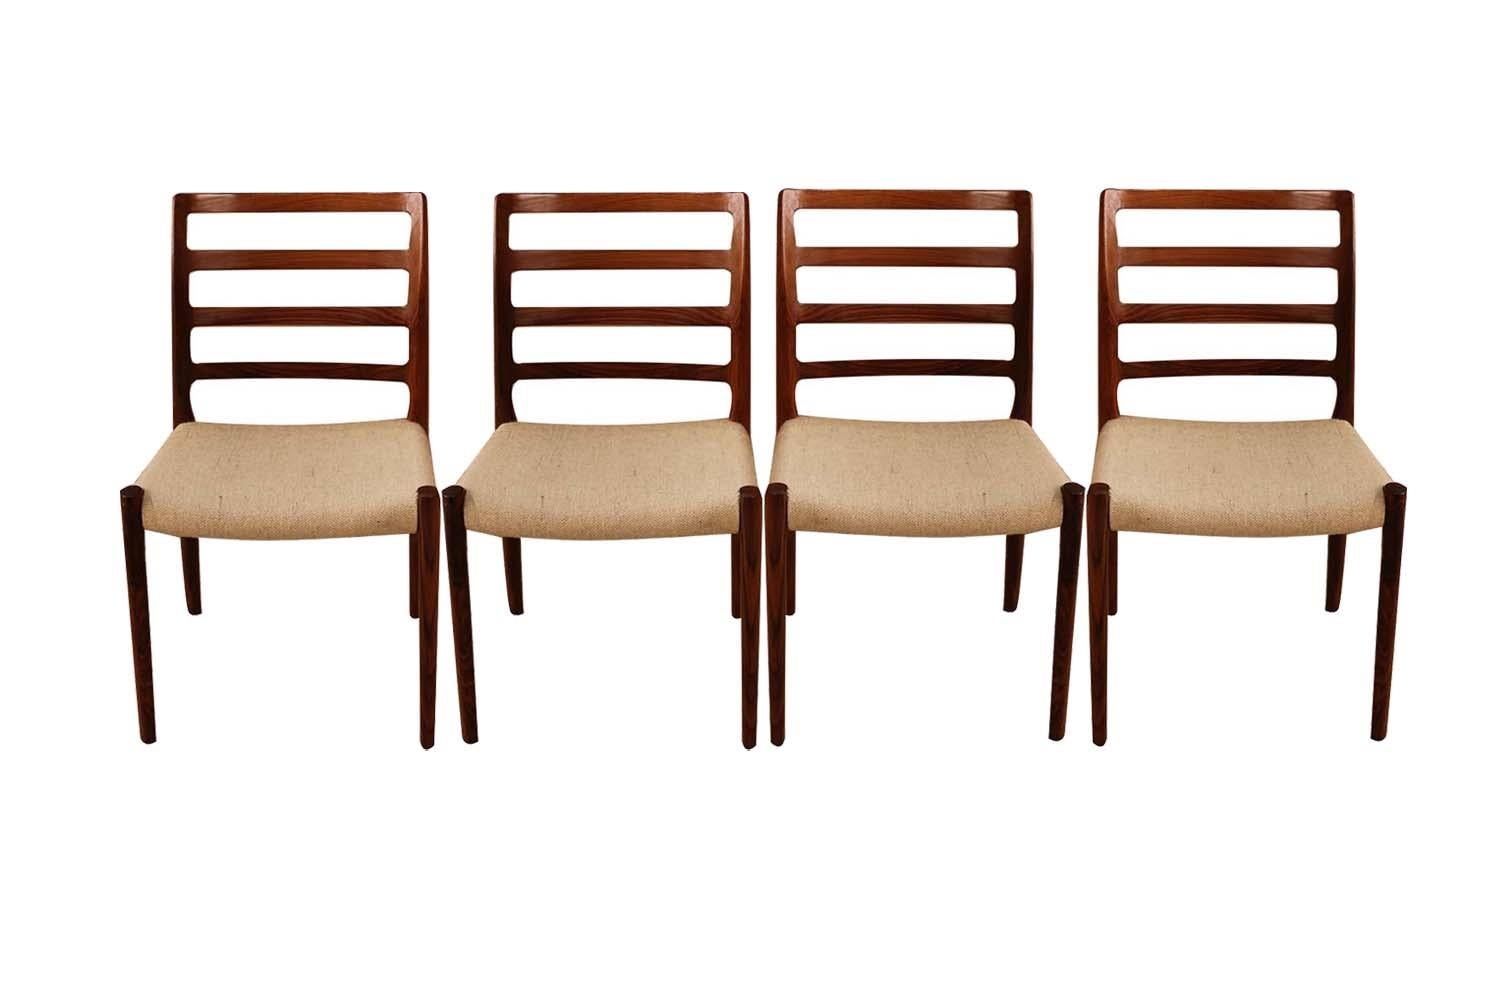 An absolutely stunning set of four midcentury Danish modern rosewood dining chairs model 85 designed by Niels Otto Moller for J.L. Møllers Møbelfabrik in Denmark. Makers stamp (Moller Models made in Denmark) underneath seats. These gorgeous chairs